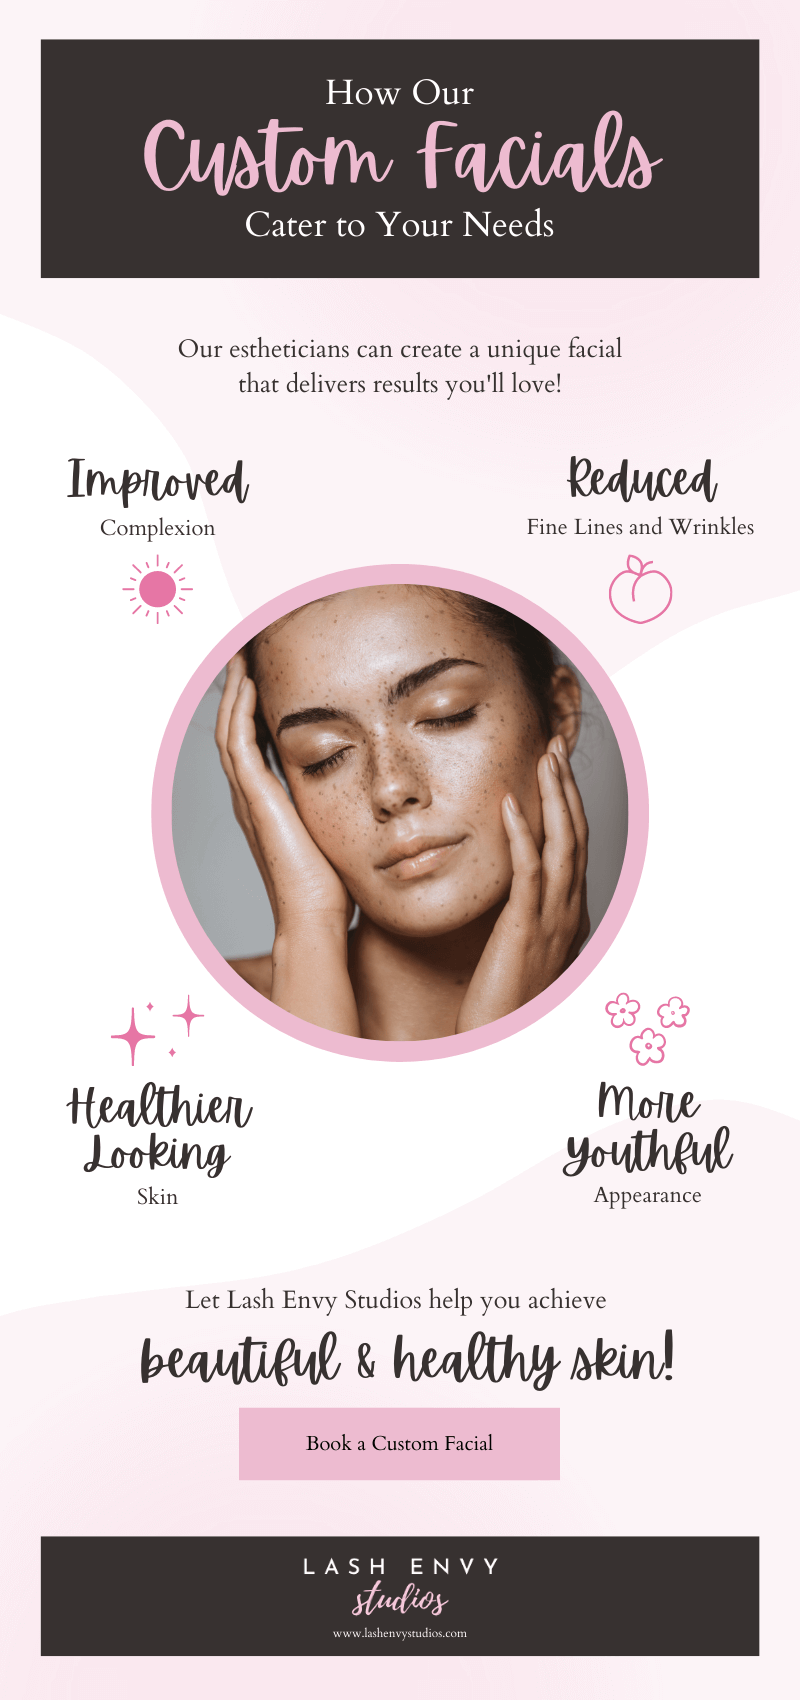 M17103 - Lash Envy Studios - How Our Custom Facials Cater To Your Needs - Infographic (1).png